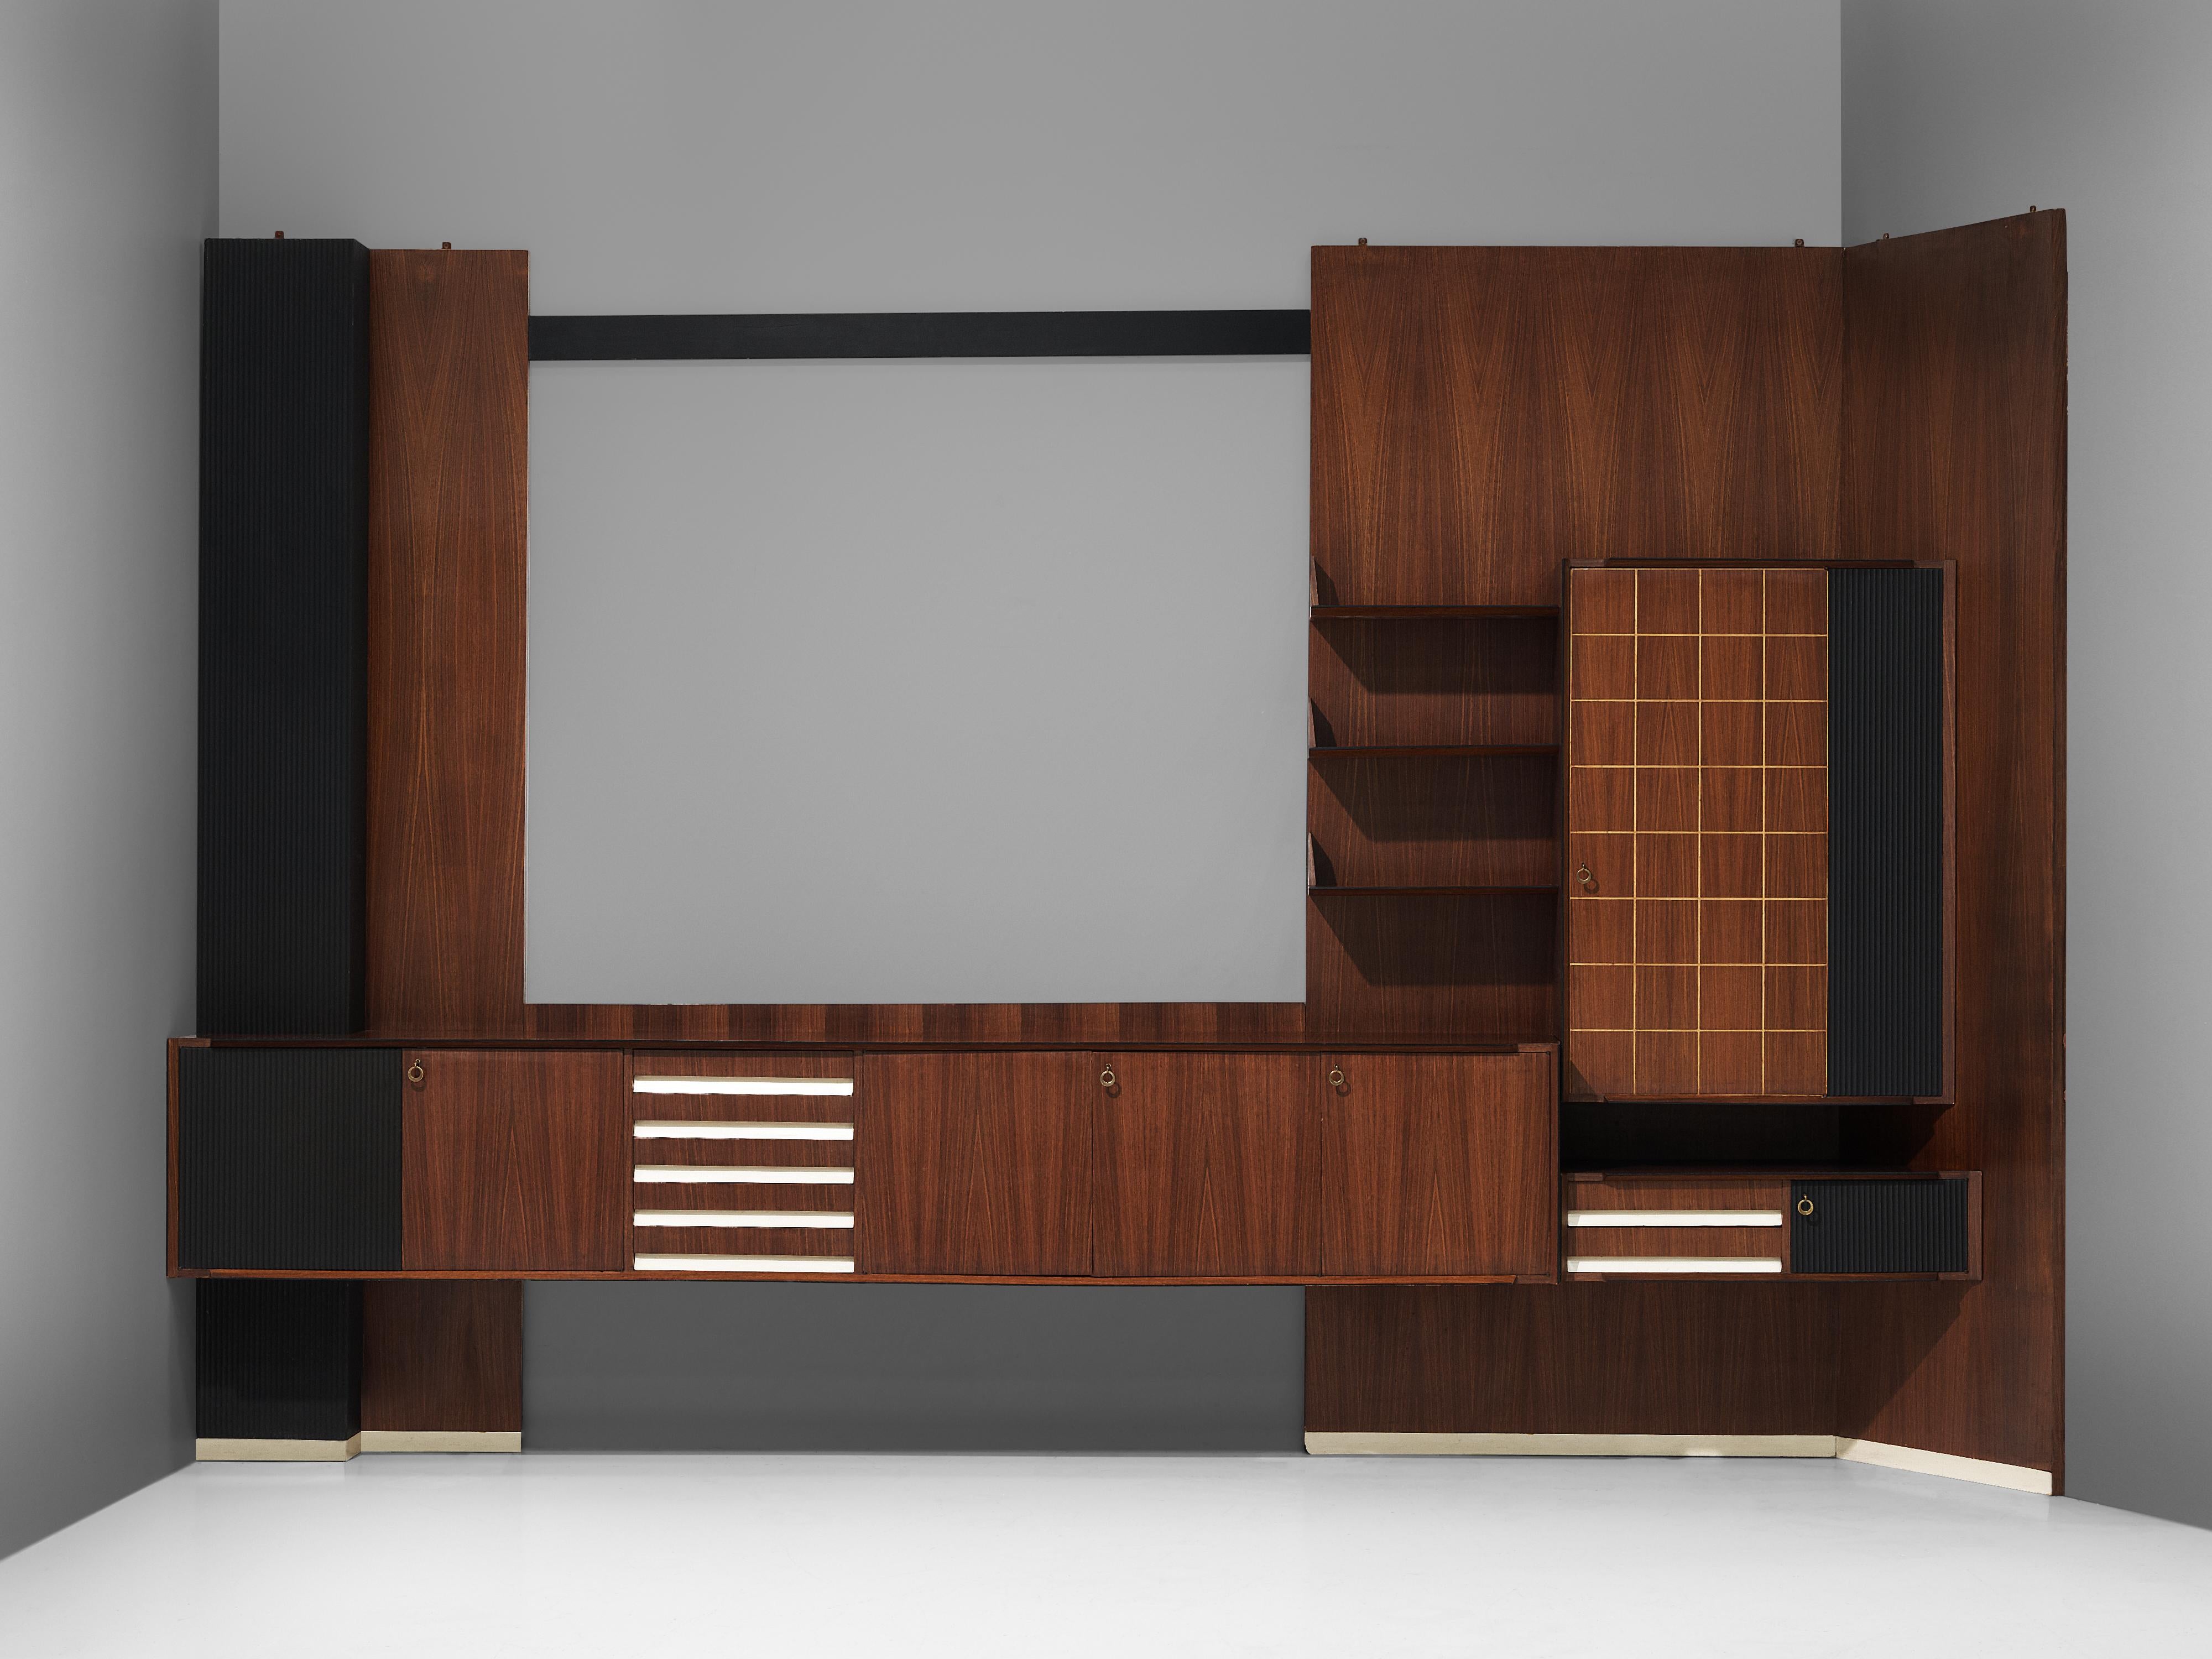 Vittorio Dassi, custom-made wall unit, mahogany, wood, brass, Italy, 1950s

A large wall unit in mahogany designed by Vittorio Dassi. The piece was a commissioned work that is adapted to the clients room in the way the small side part is arranged